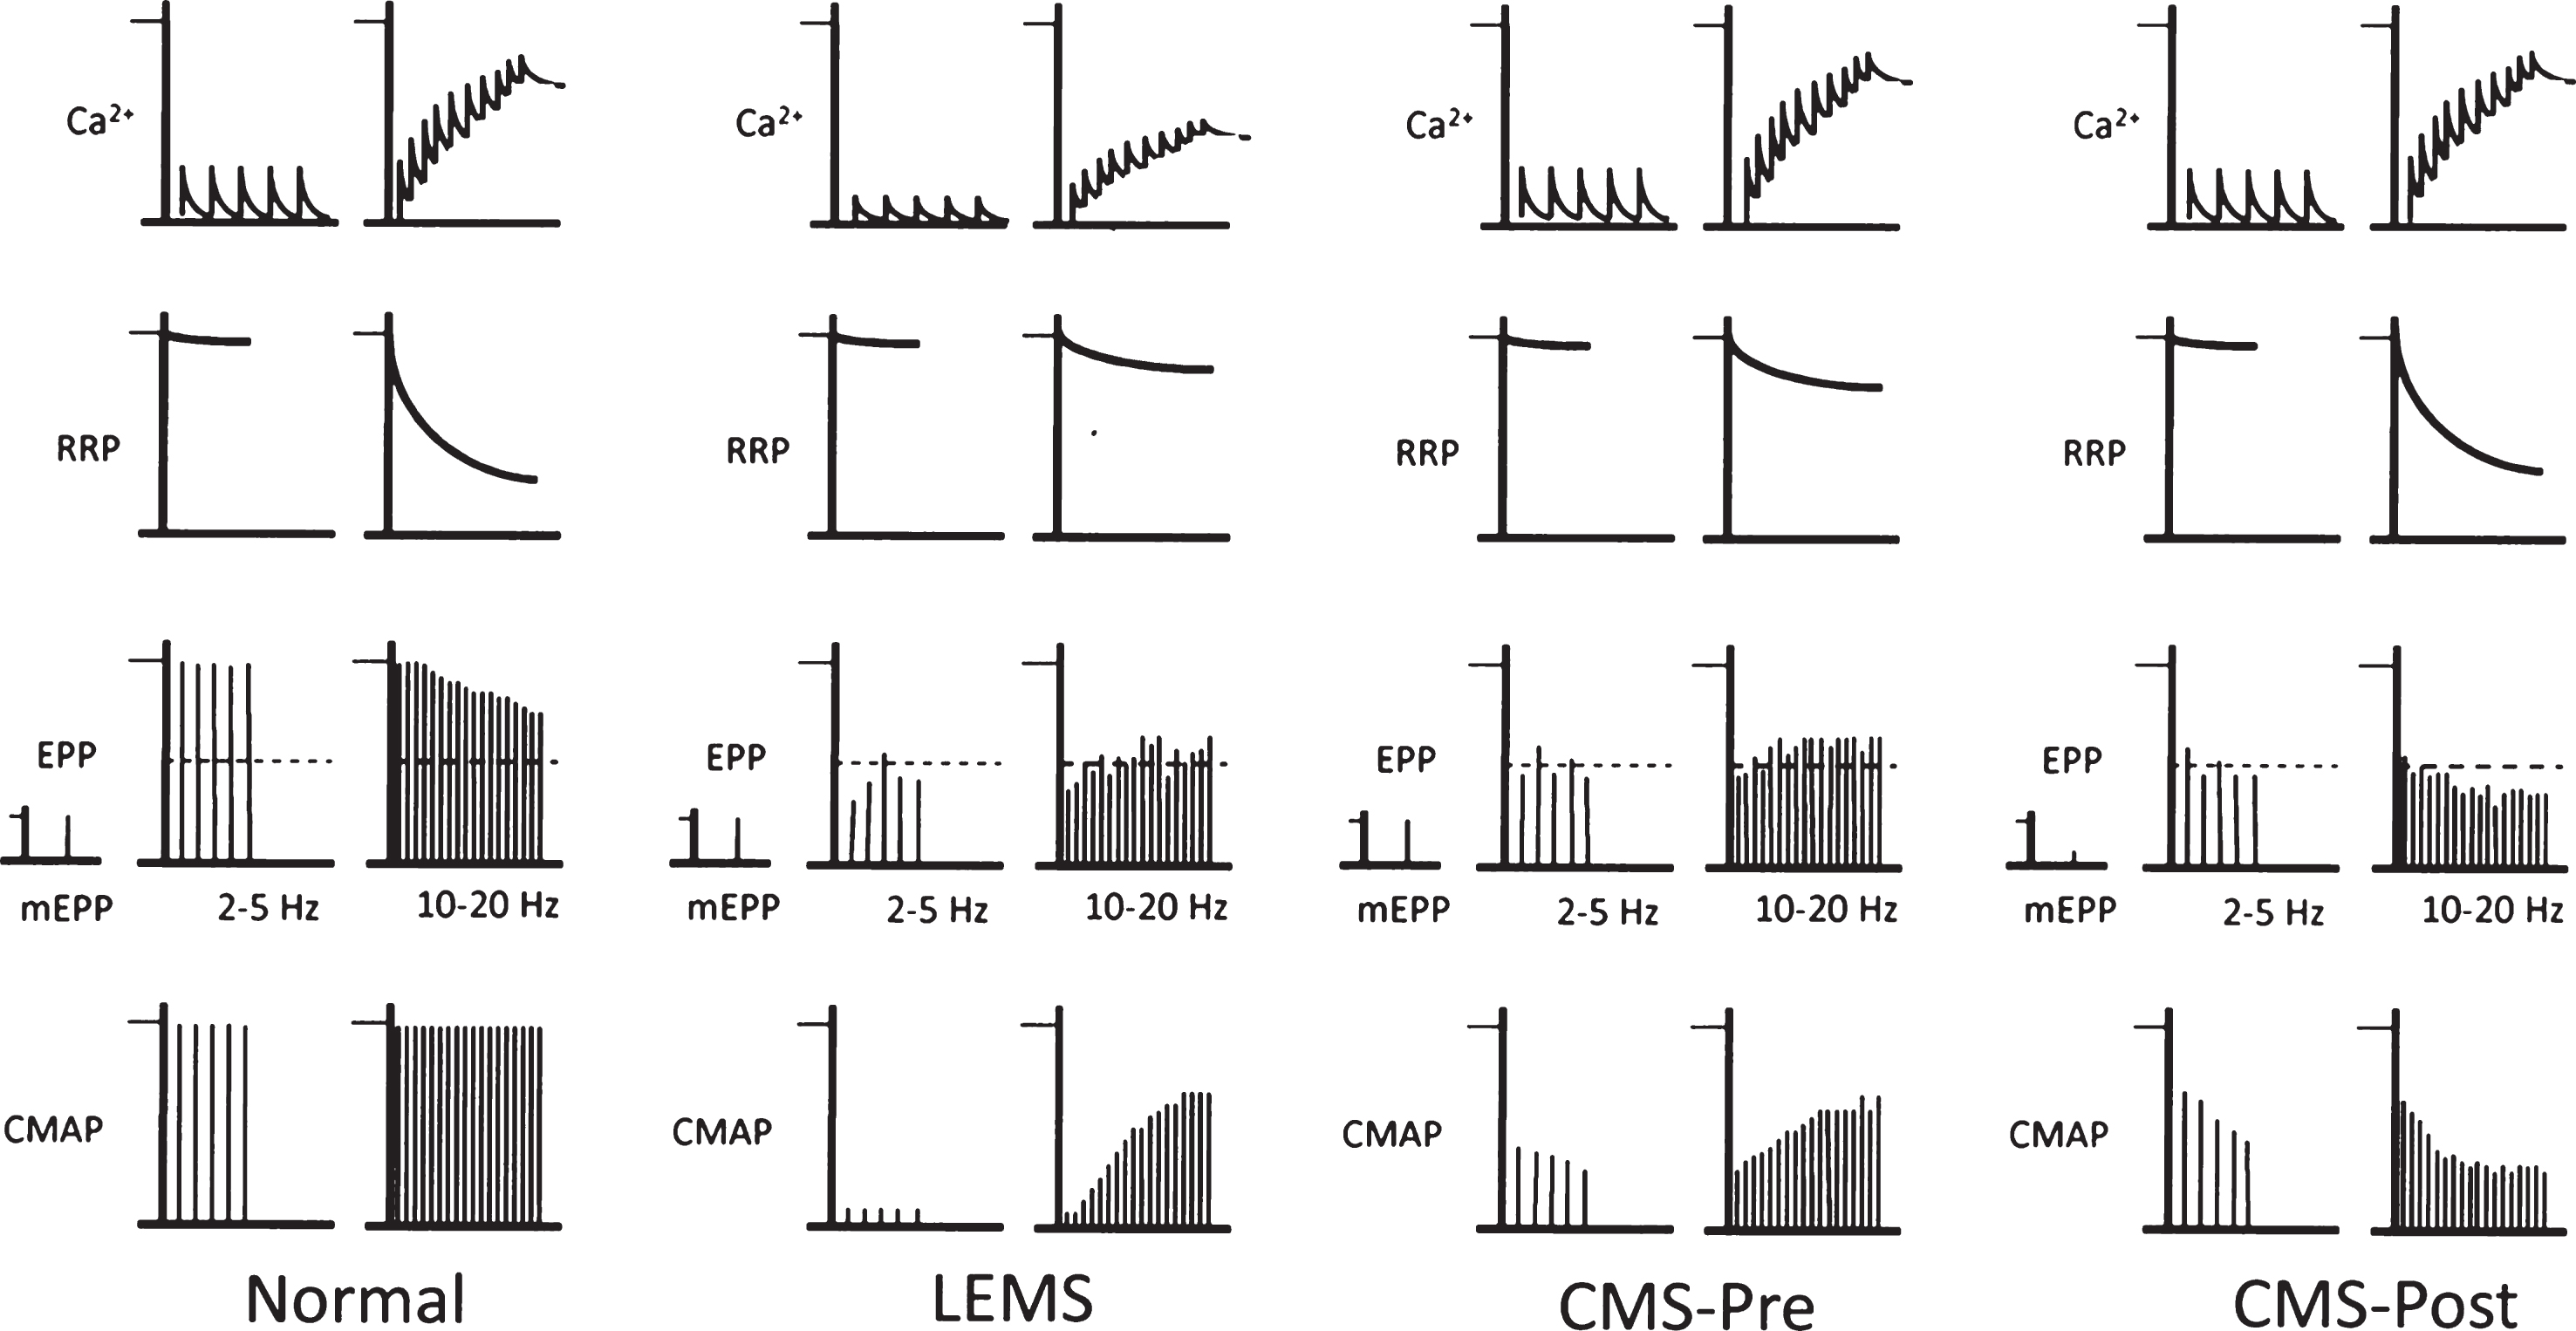 patterns of transmitter release from motor nerve terminals. This figure provides a qualitative view of how different patterns of NMJ response to repetitive activity (2–5 Hz and 10–20 Hz) may arise, and their impact on the CMAP. Top row, level of Ca2+ in the nerve terminal. Second row, size of ‘readily releasable pool’ (RRP) of transmitter quanta. Third row, mEPP followed by EPPs. Dotted horizontal line shows mAP threshold. Bottom row, CMAPs. At normal NMJs, at 2–5 Hz, each nAP causes a brief increase in Ca2+ which triggers release and generates large EPPs. These all trigger mAPs, so the CMAP shows no decrement. The RRP is almost fully replenished between the responses, although there may be a little decline. At 10–20 Hz, the individual Ca2+ transients summate, raising the level of Ca2 + . However, now there is not time for the RRP to be fully replenished between responses, so it declines significantly. The net effect is a modest decline in quantal content (QC) and EPP amplitude. However, the EPPs remain suprathreshold, so there is no decrement of the CMAP. In LEMS, the individual Ca2+ transients are much smaller than normal, so the QC at low frequency is very low and few EPPs reach threshold, so the CMAP is greatly reduced. At higher frequency, the Ca2+ transients summate, so the Ca2+ level increases. At the same time, because the QC is low, there is little decline of the RRP. As a result, the increased Ca2+ level causes a significant increase in the QC and EPP amplitude, so more EPPs reach threshold and the CMAP increases. In forms of CMS in which presynaptic function is impaired (for reasons other than a decrease in Ca2+ entry), QC is reduced at low frequency, even though mEPP amplitude, Ca2+ entry and RRP size are all normal. As a result, there is little decline in the RRP. At high frequency, the build-up of Ca2+ causes enhanced release and some EPPs reach threshold, causing some increase in the CMAP. In forms of CMS that act on the postsynaptic membrane, the amplitude of the mEPPs (‘quantal size’) is generally much smaller than normal. During low frequency activity, although the QC is normal, the EPPs are small and shows some decline. As a result, many EPPs do not reach threshold so the CMAP is small and may show some decrement as the RRP gets smaller. At high frequency, the decline in RRP results in a decline in EPP amplitude, in spite of the increase in Ca2+ level, leading to significant decrement of the CMAP.